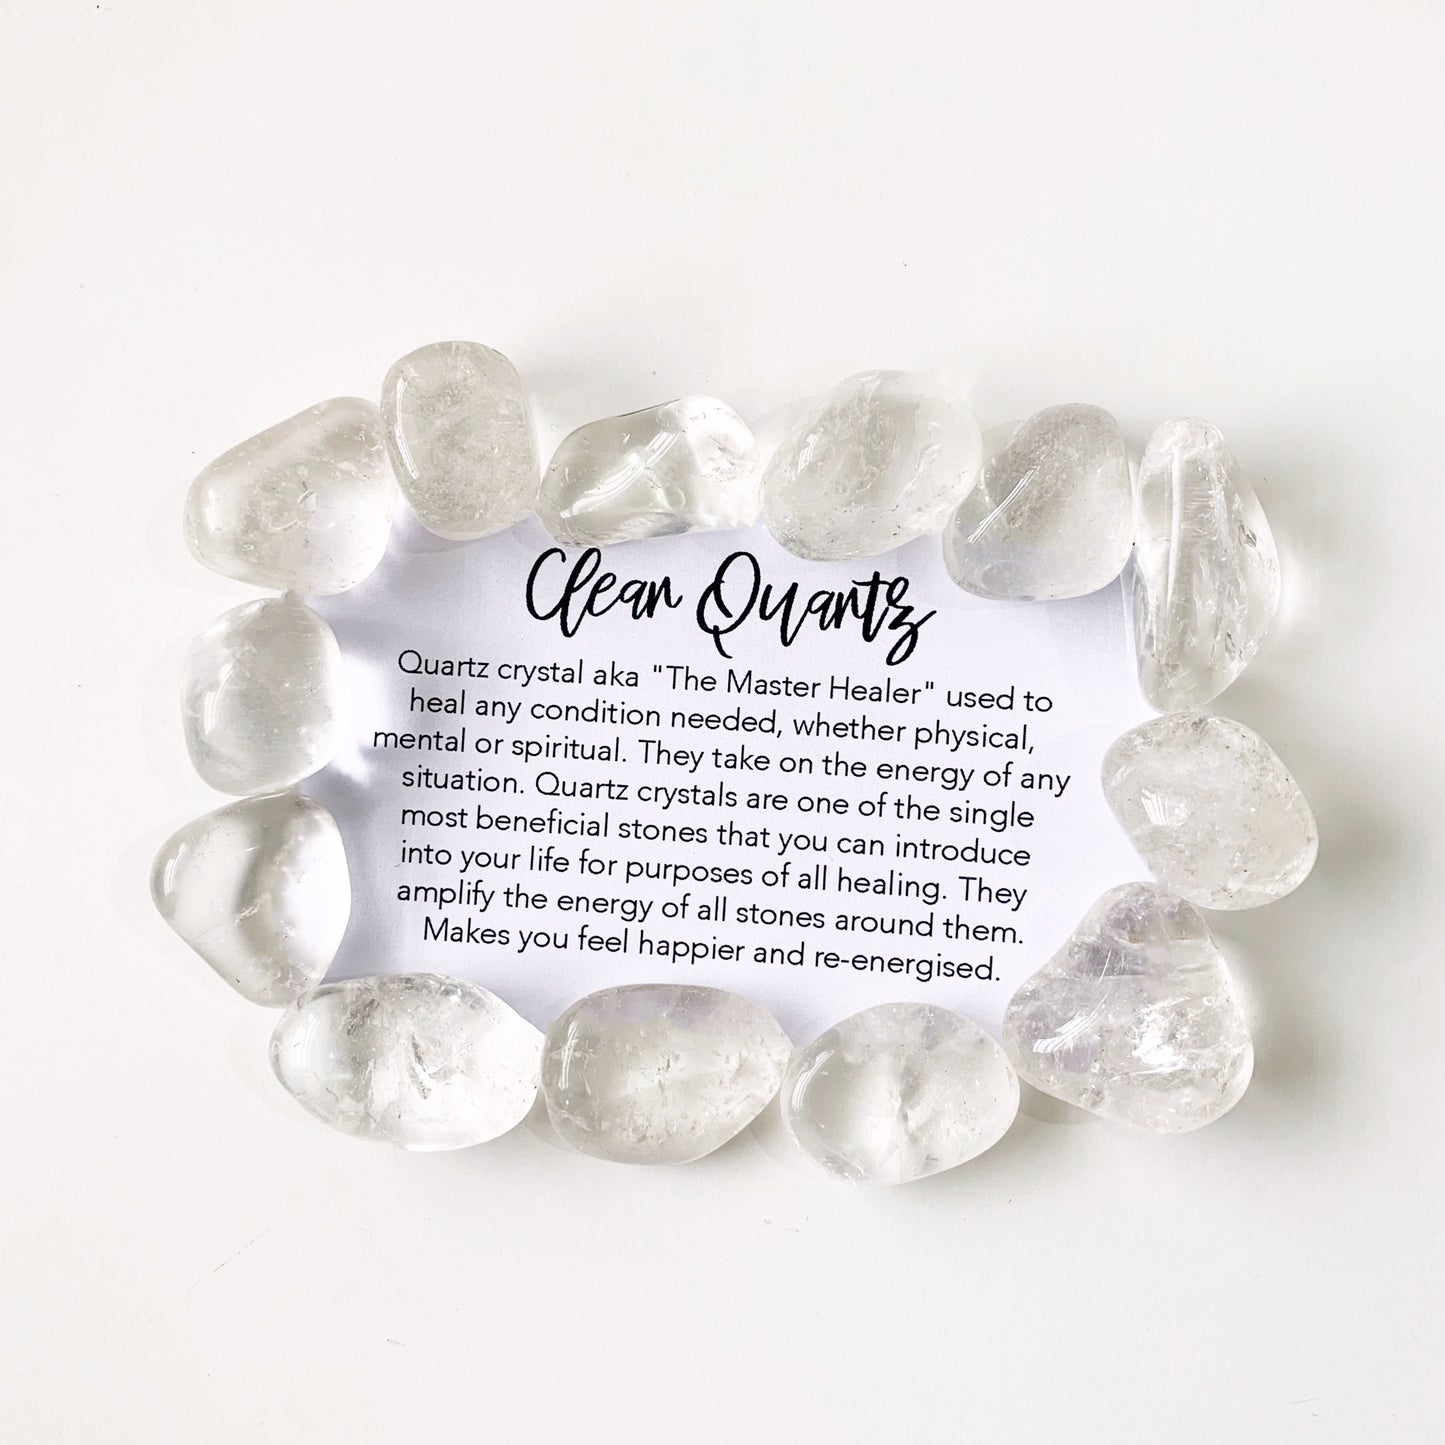 Clear quartz is highly prized for its ability to clear the mind of negativity to enhance higher spiritual receptiveness. It is considered the master of all healing crystals due to its ability to magnify or amplify healing vibrations of other crystals. This clear quartzbenefit is at the heart of clear quartz meaning.     Listing 1 stone.